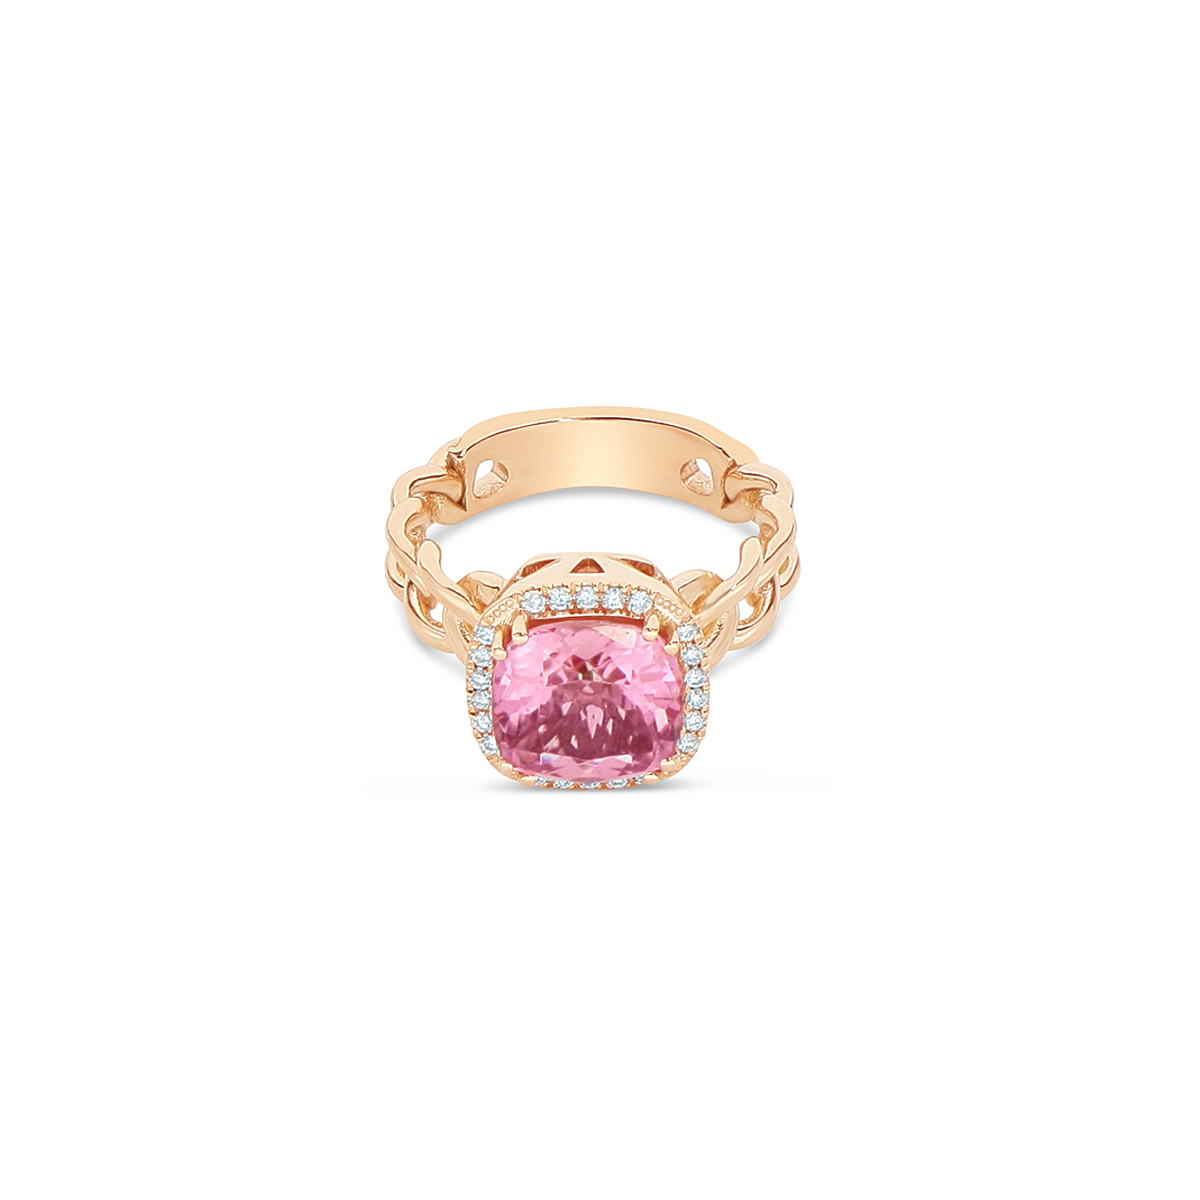 Pink Tourmaline Ring in 18kt Rose Gold with White Diamonds